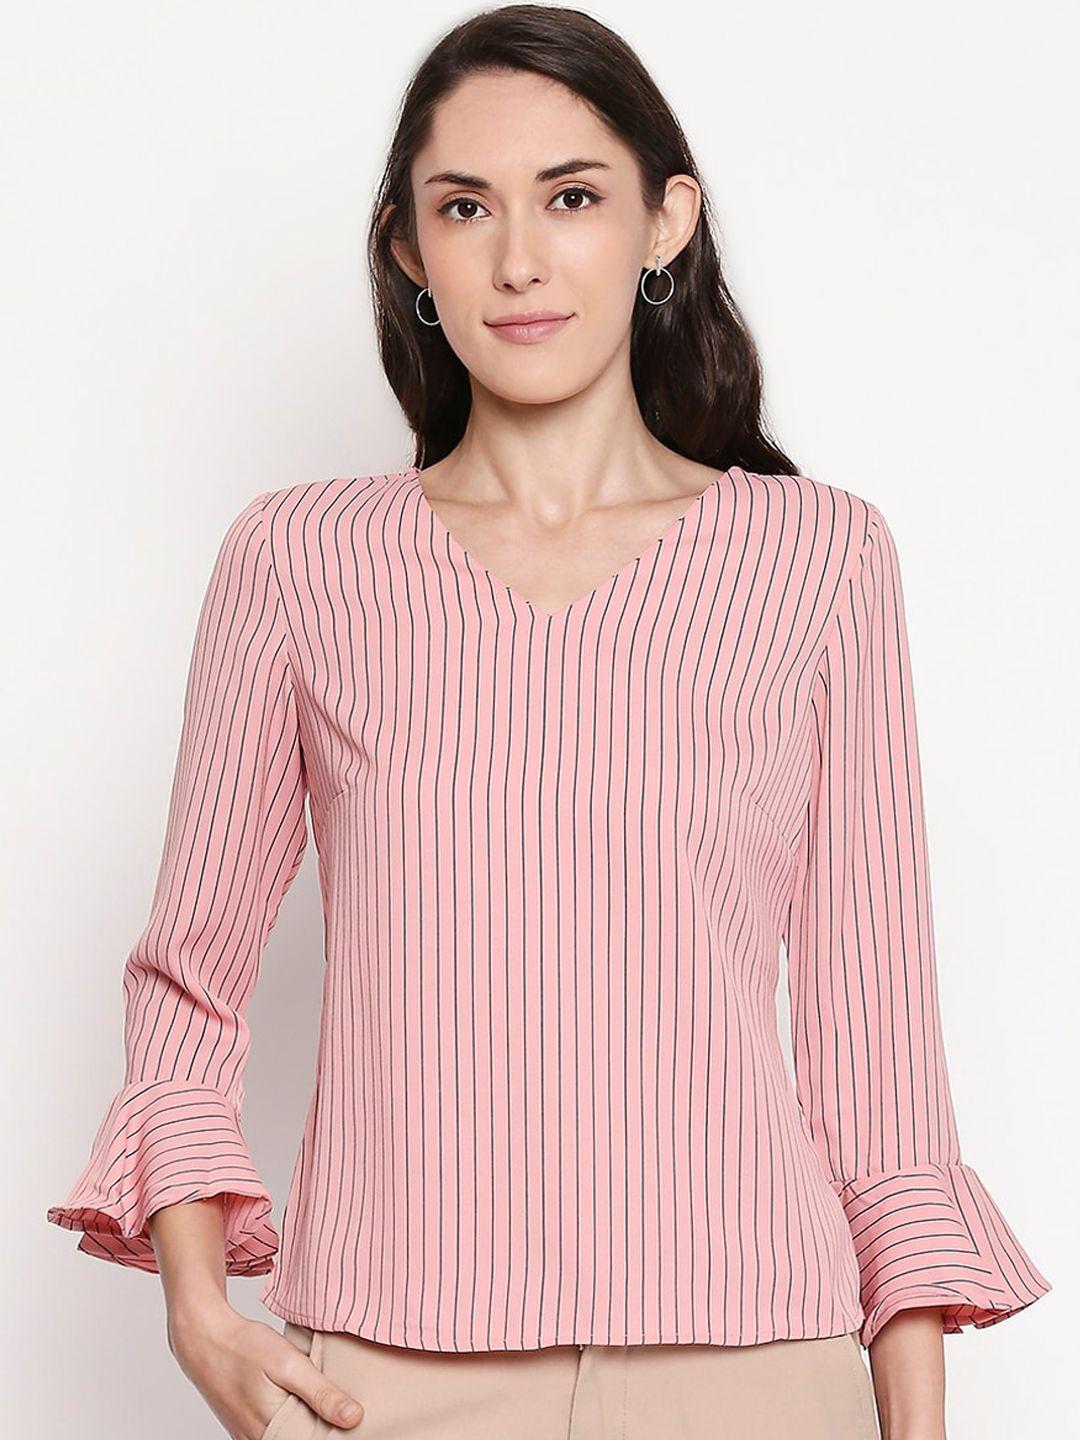 annabelle-by-pantaloons-women-pink-striped-top